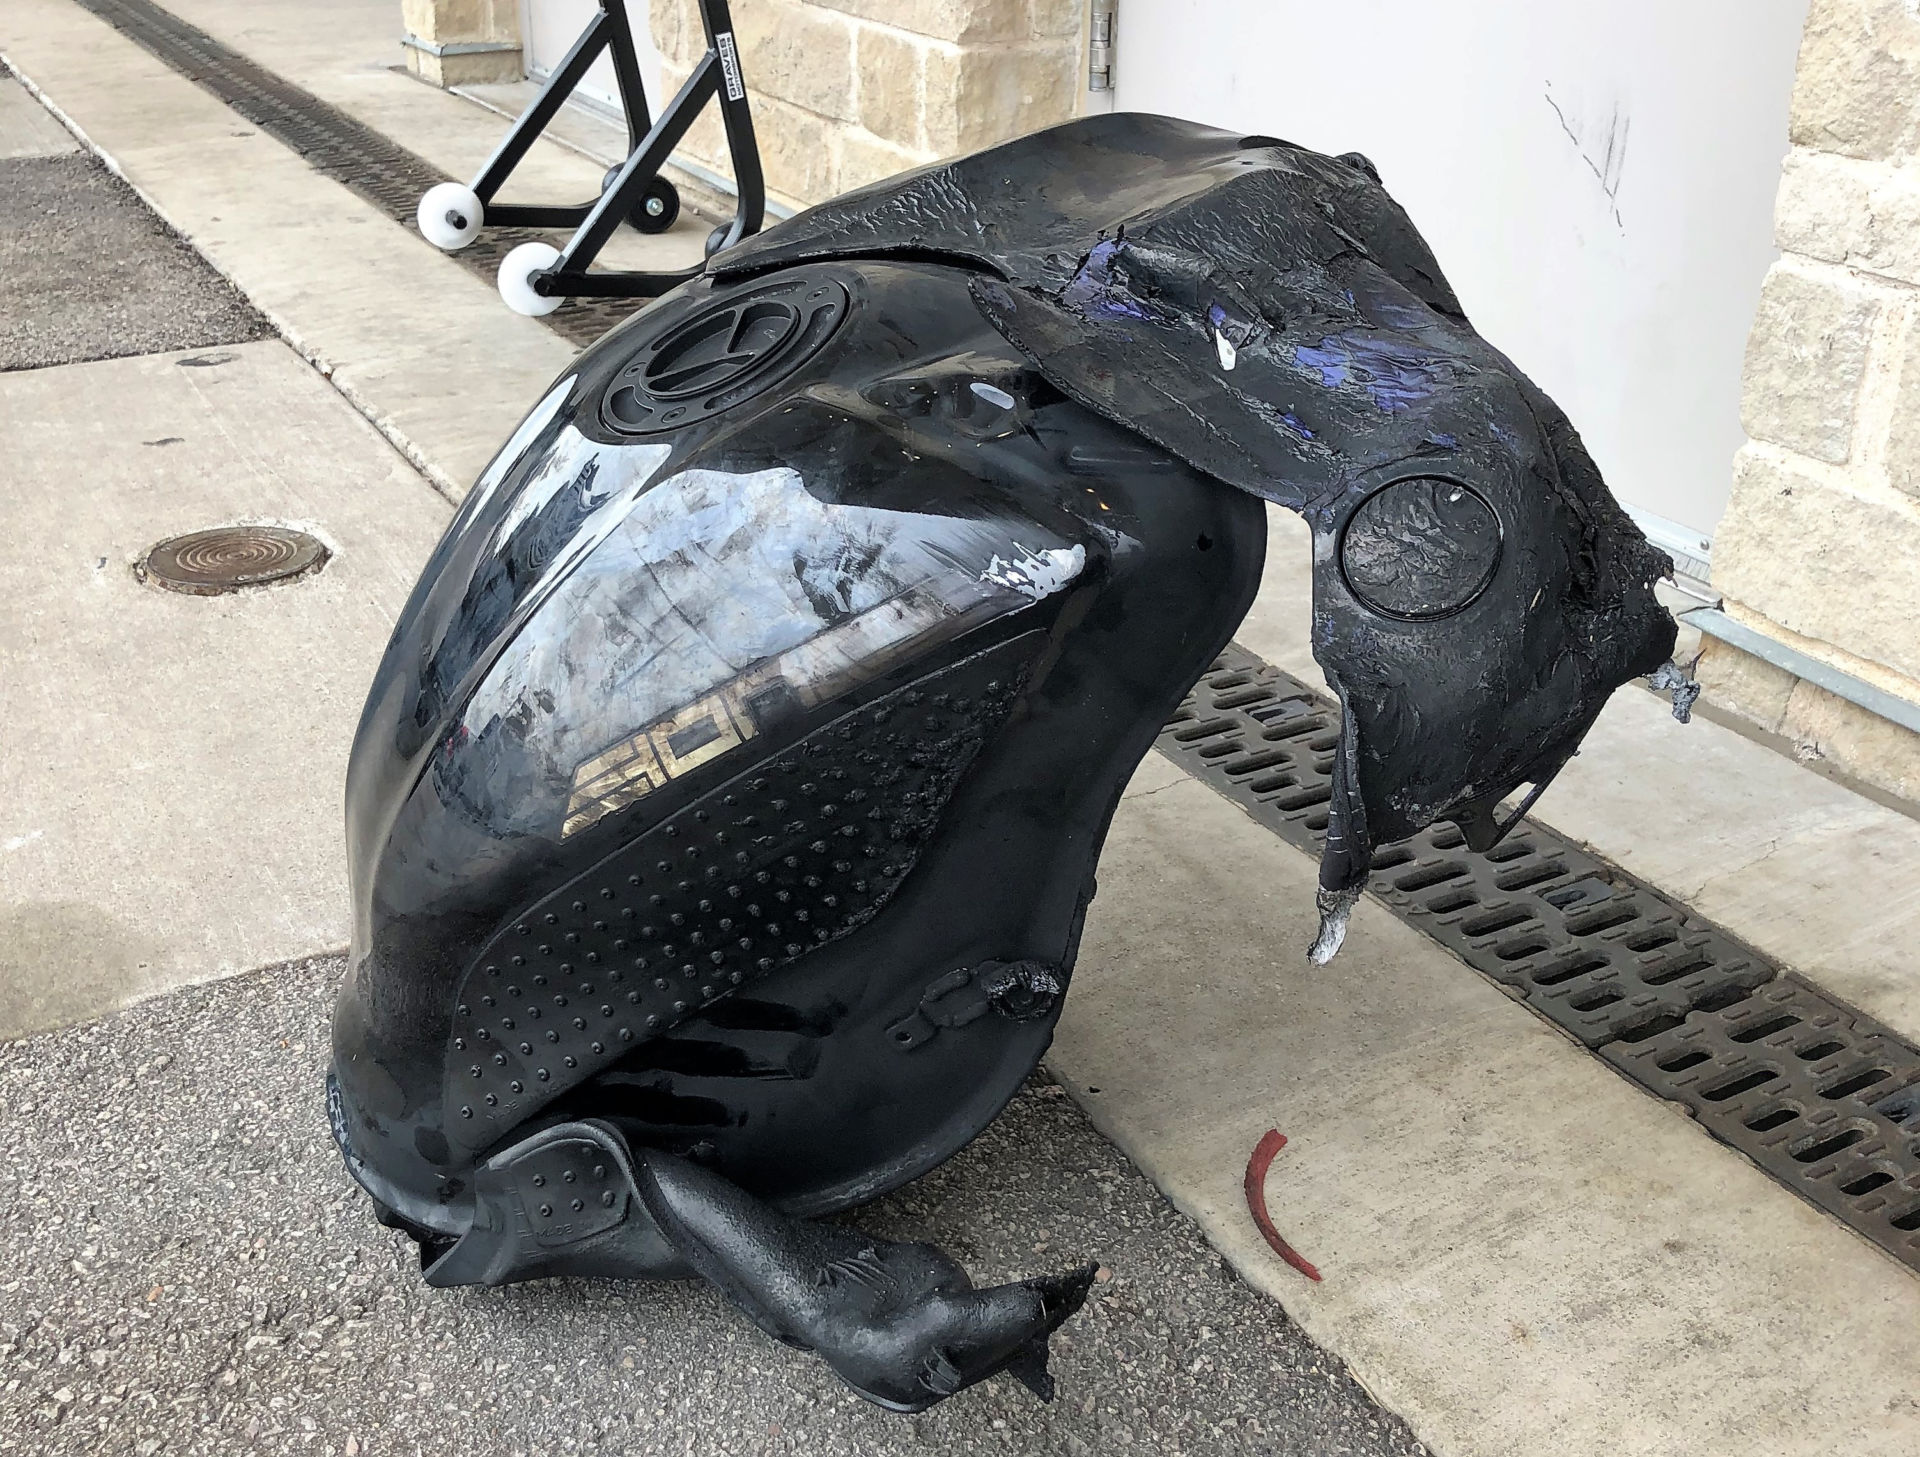 The fuel tank after Richie Escalante's fiery crash Wednesday morning at COTA. Photo by David Swarts.